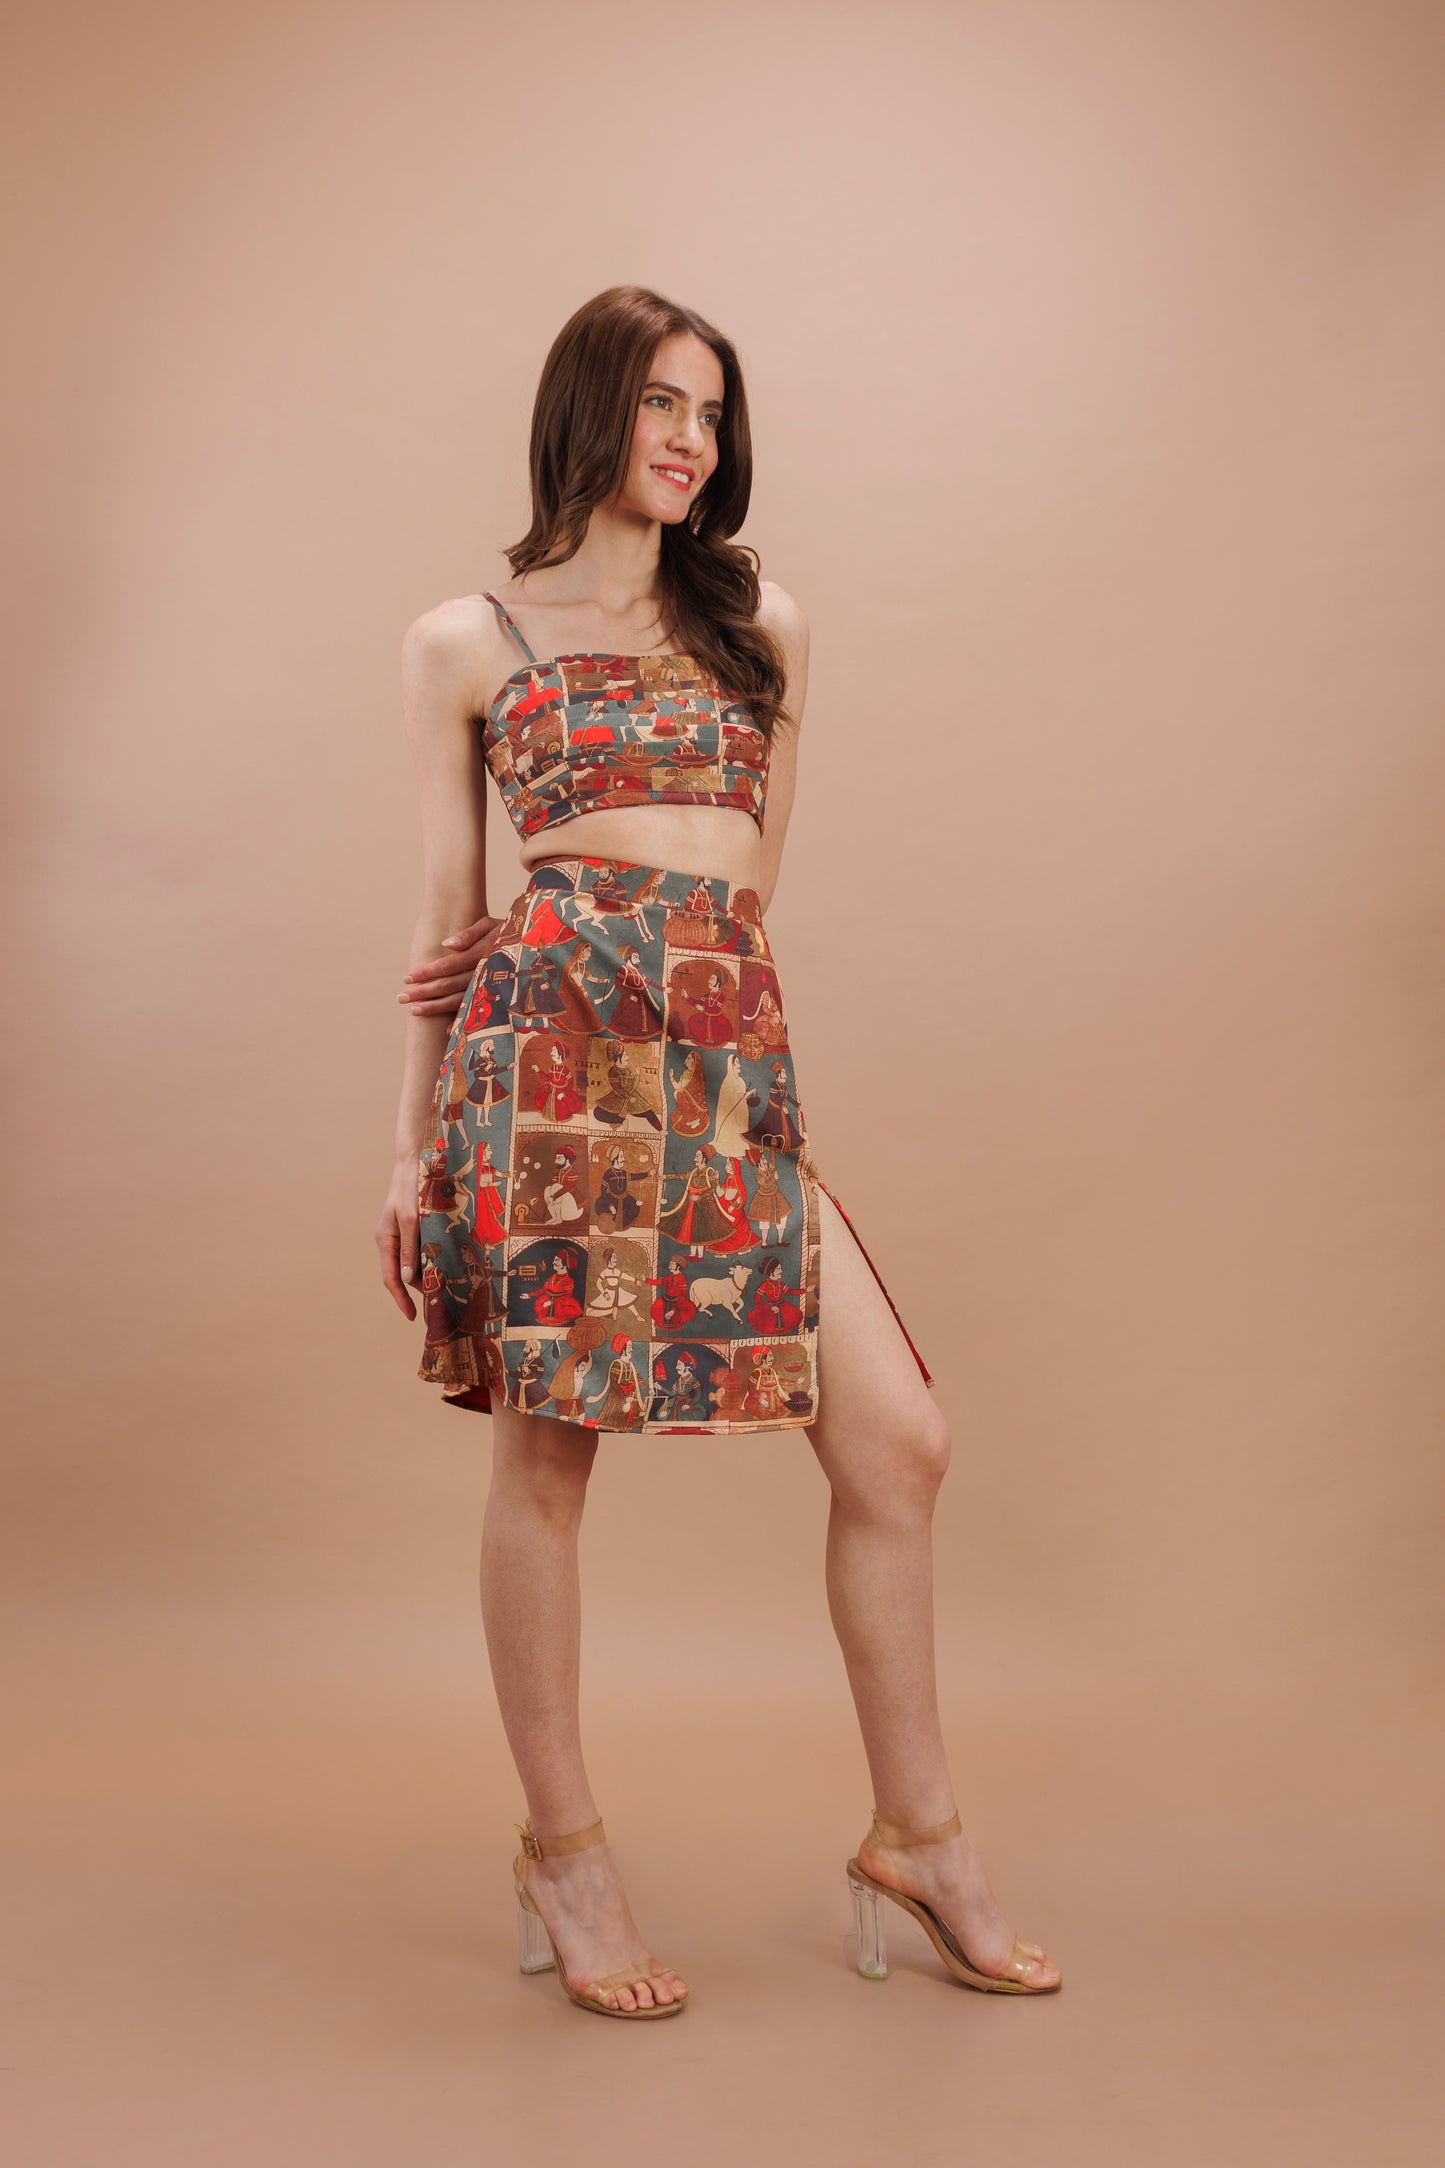 "Cairo printed skirt and bustier set"